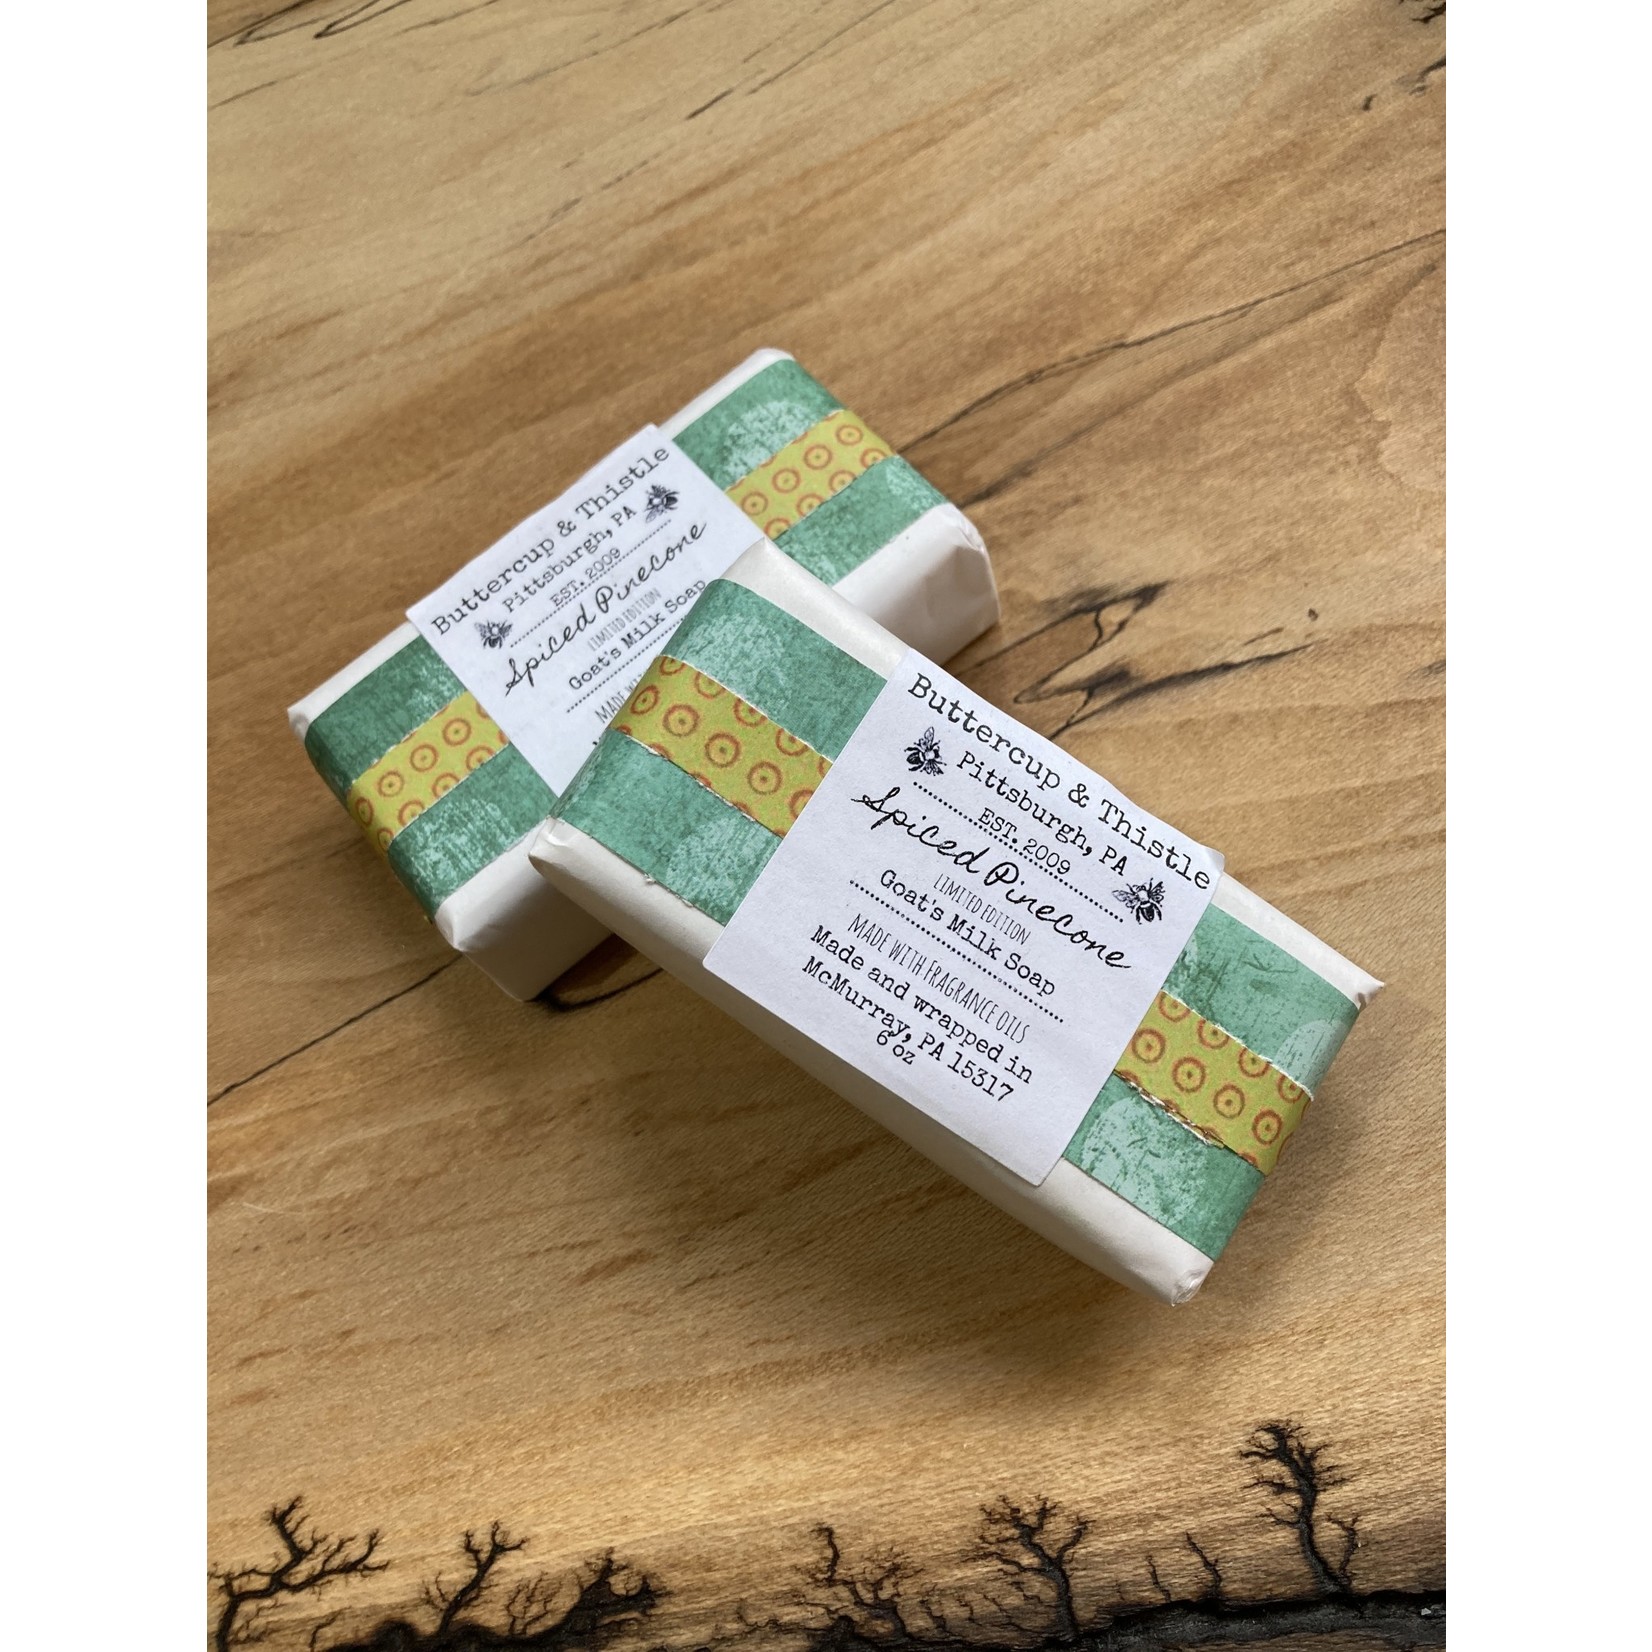 The Buttercup and Thistle Buttercup & Thistle Soap l Spiced Pinecone